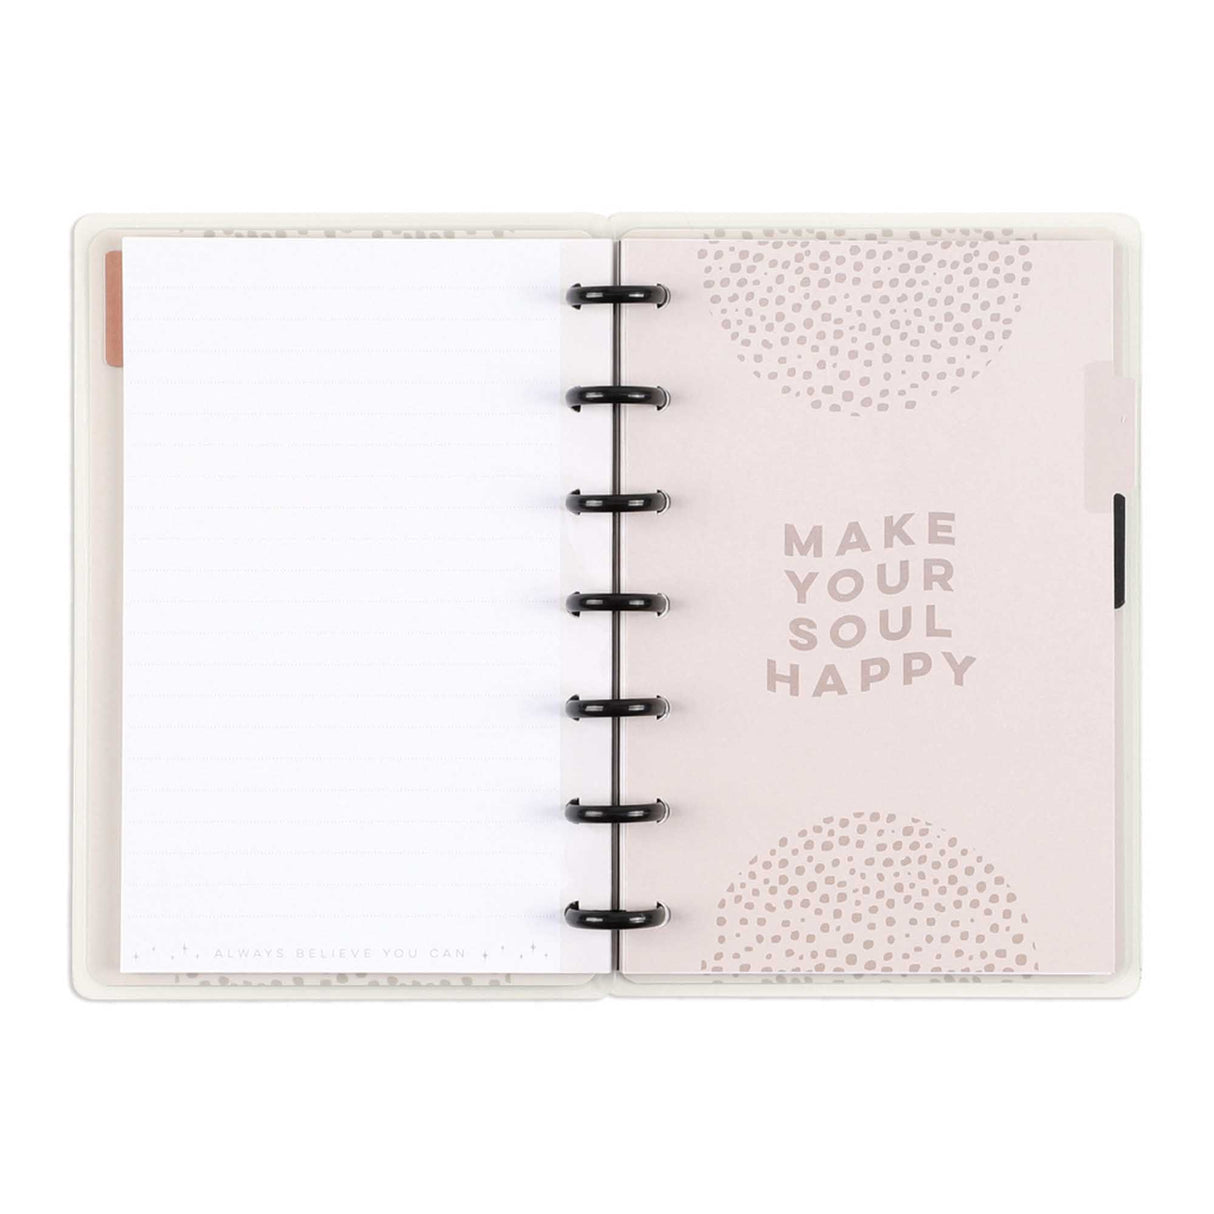 Happy Planner Taming The Wild Mini Notebook